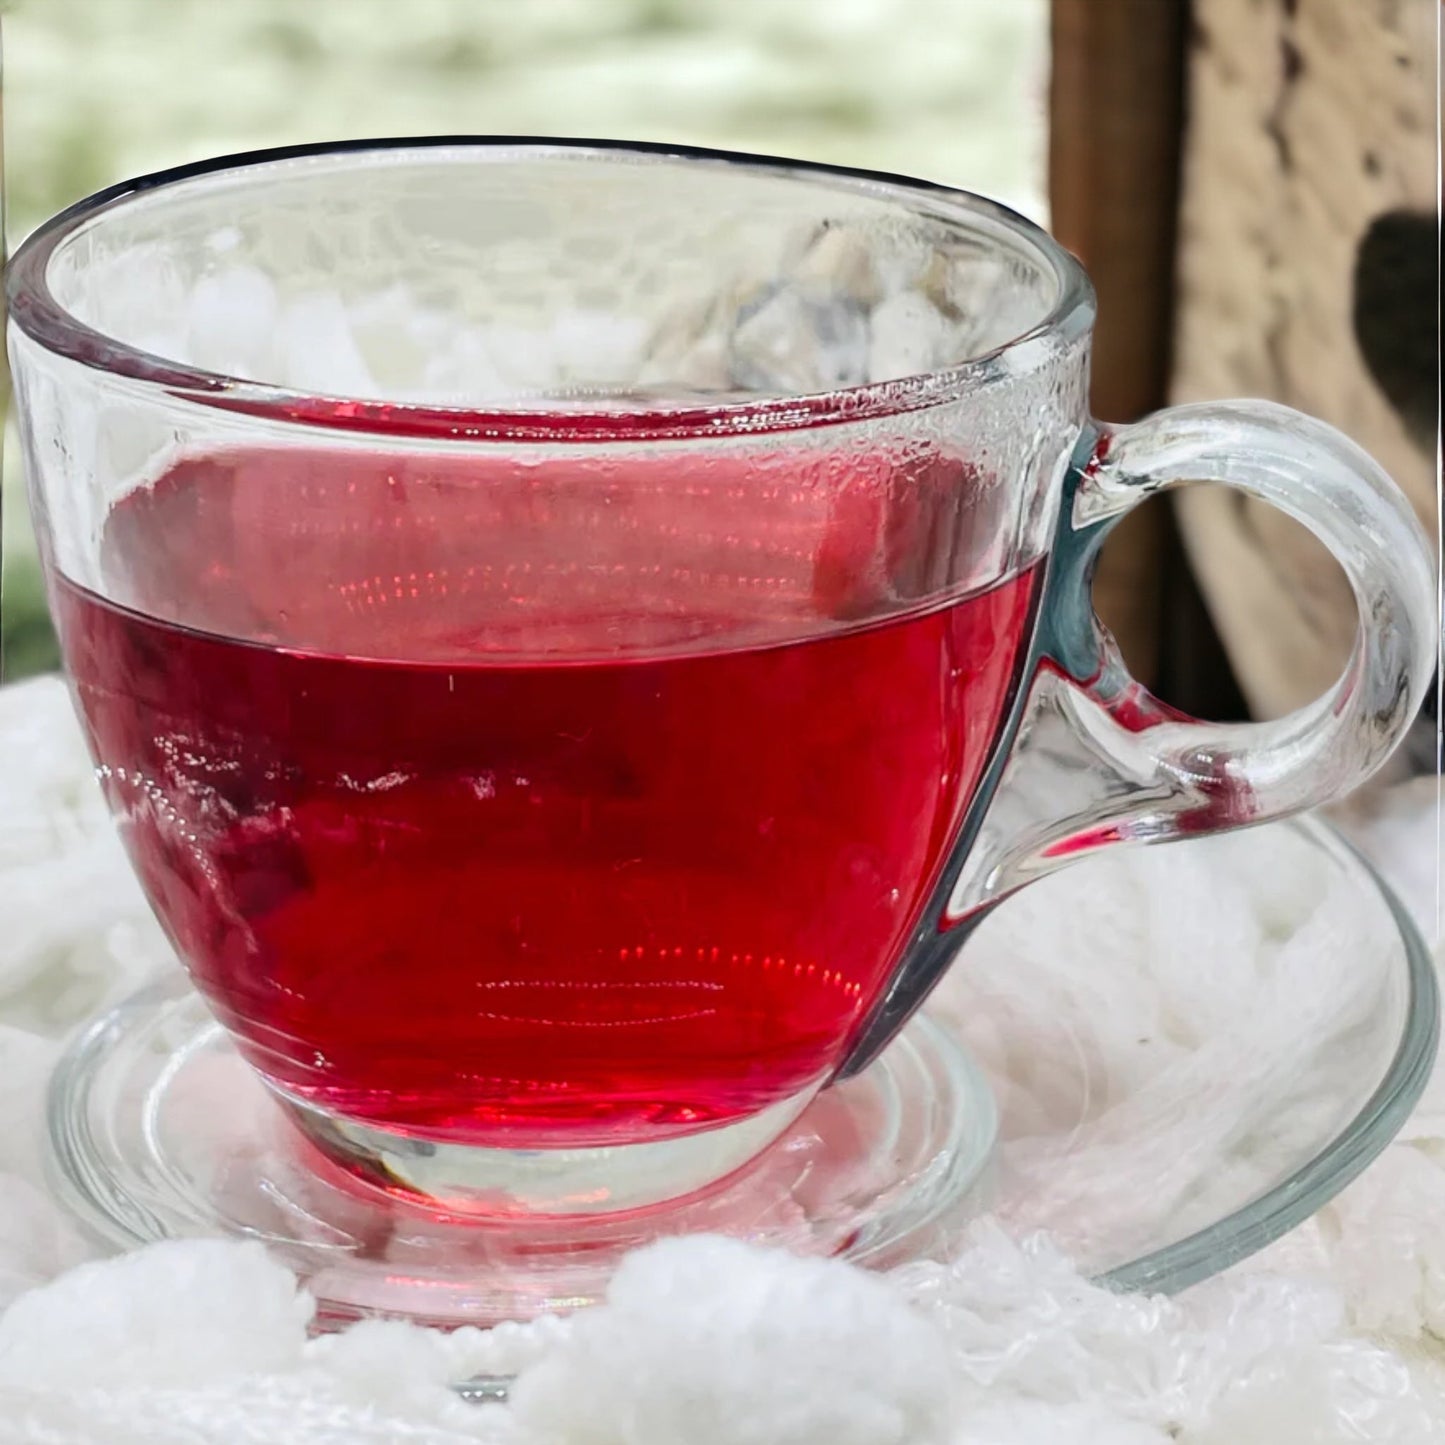 Image of a Black Cherry Berry tea blend in a glass cup with vibrant burgundy red colour